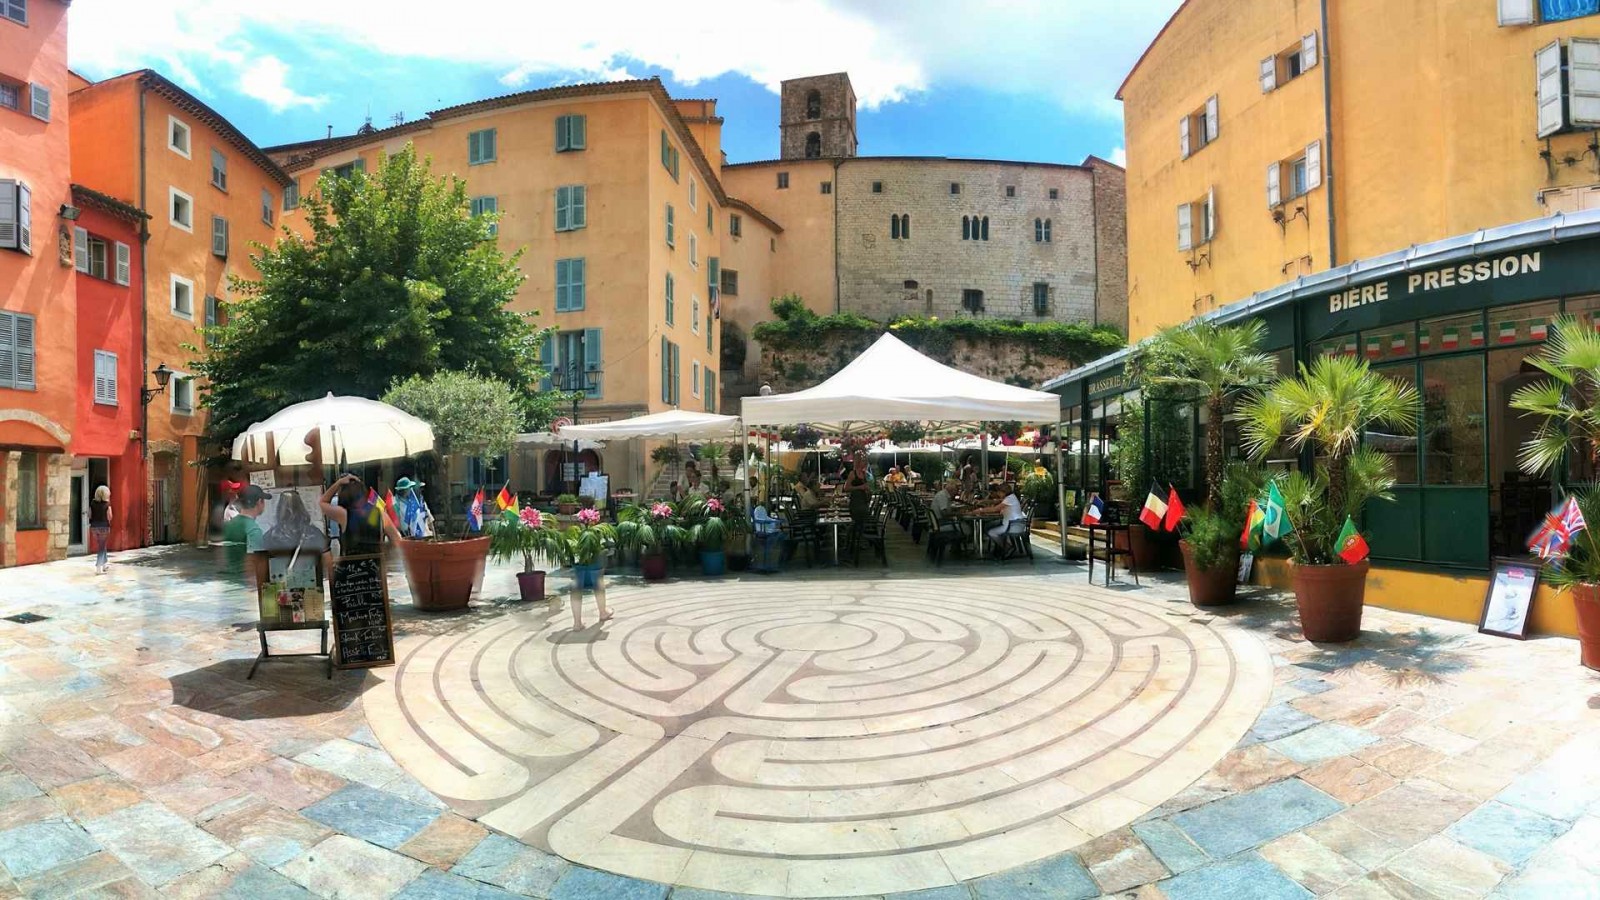 Grasse old town